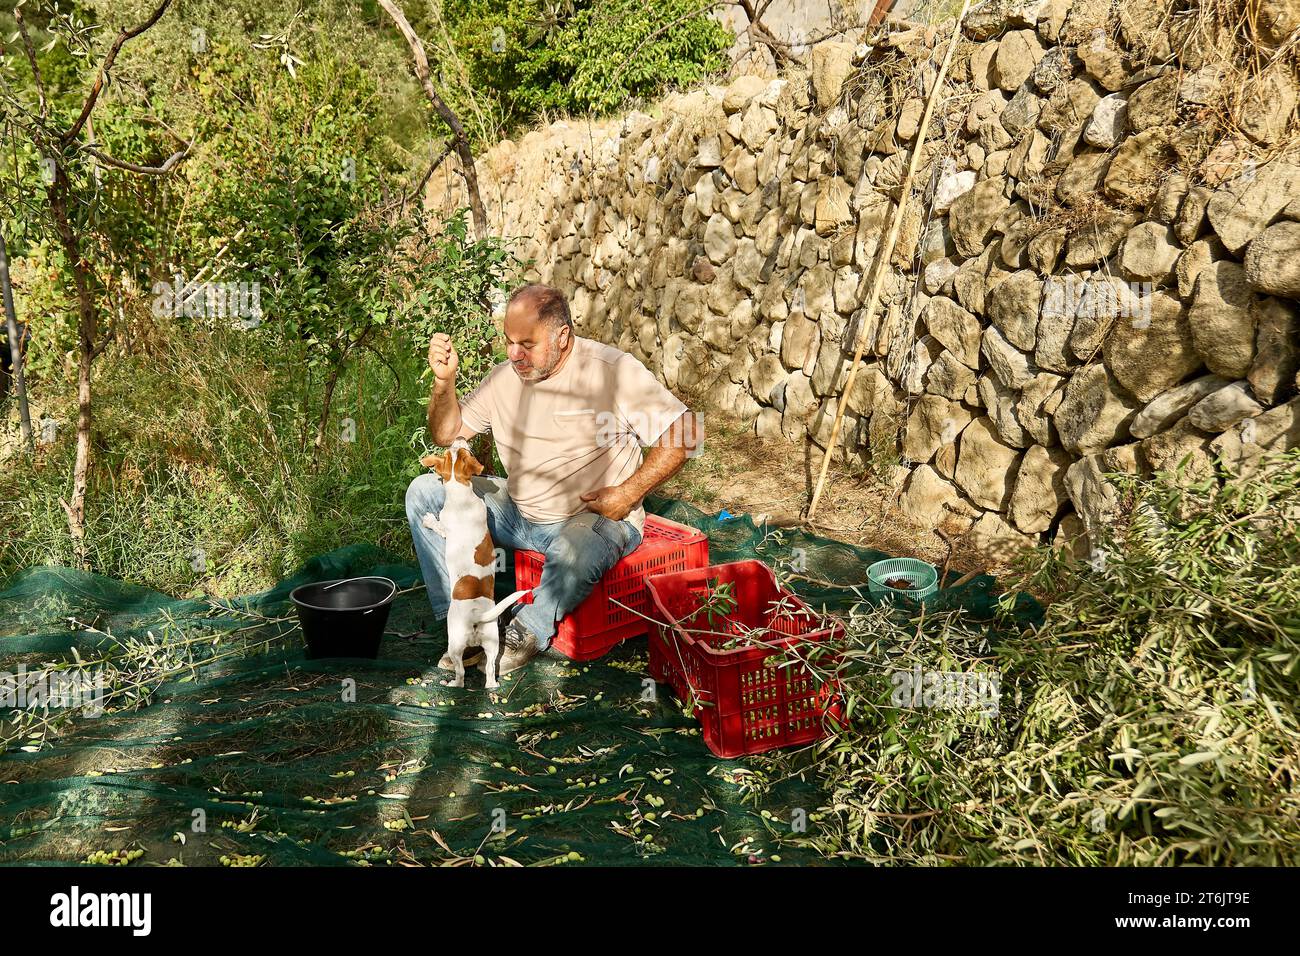 Gardener mature man picking olives and training his adorable curious jack russell terrier dog during olives harvesting works in countryside in orchard Stock Photo